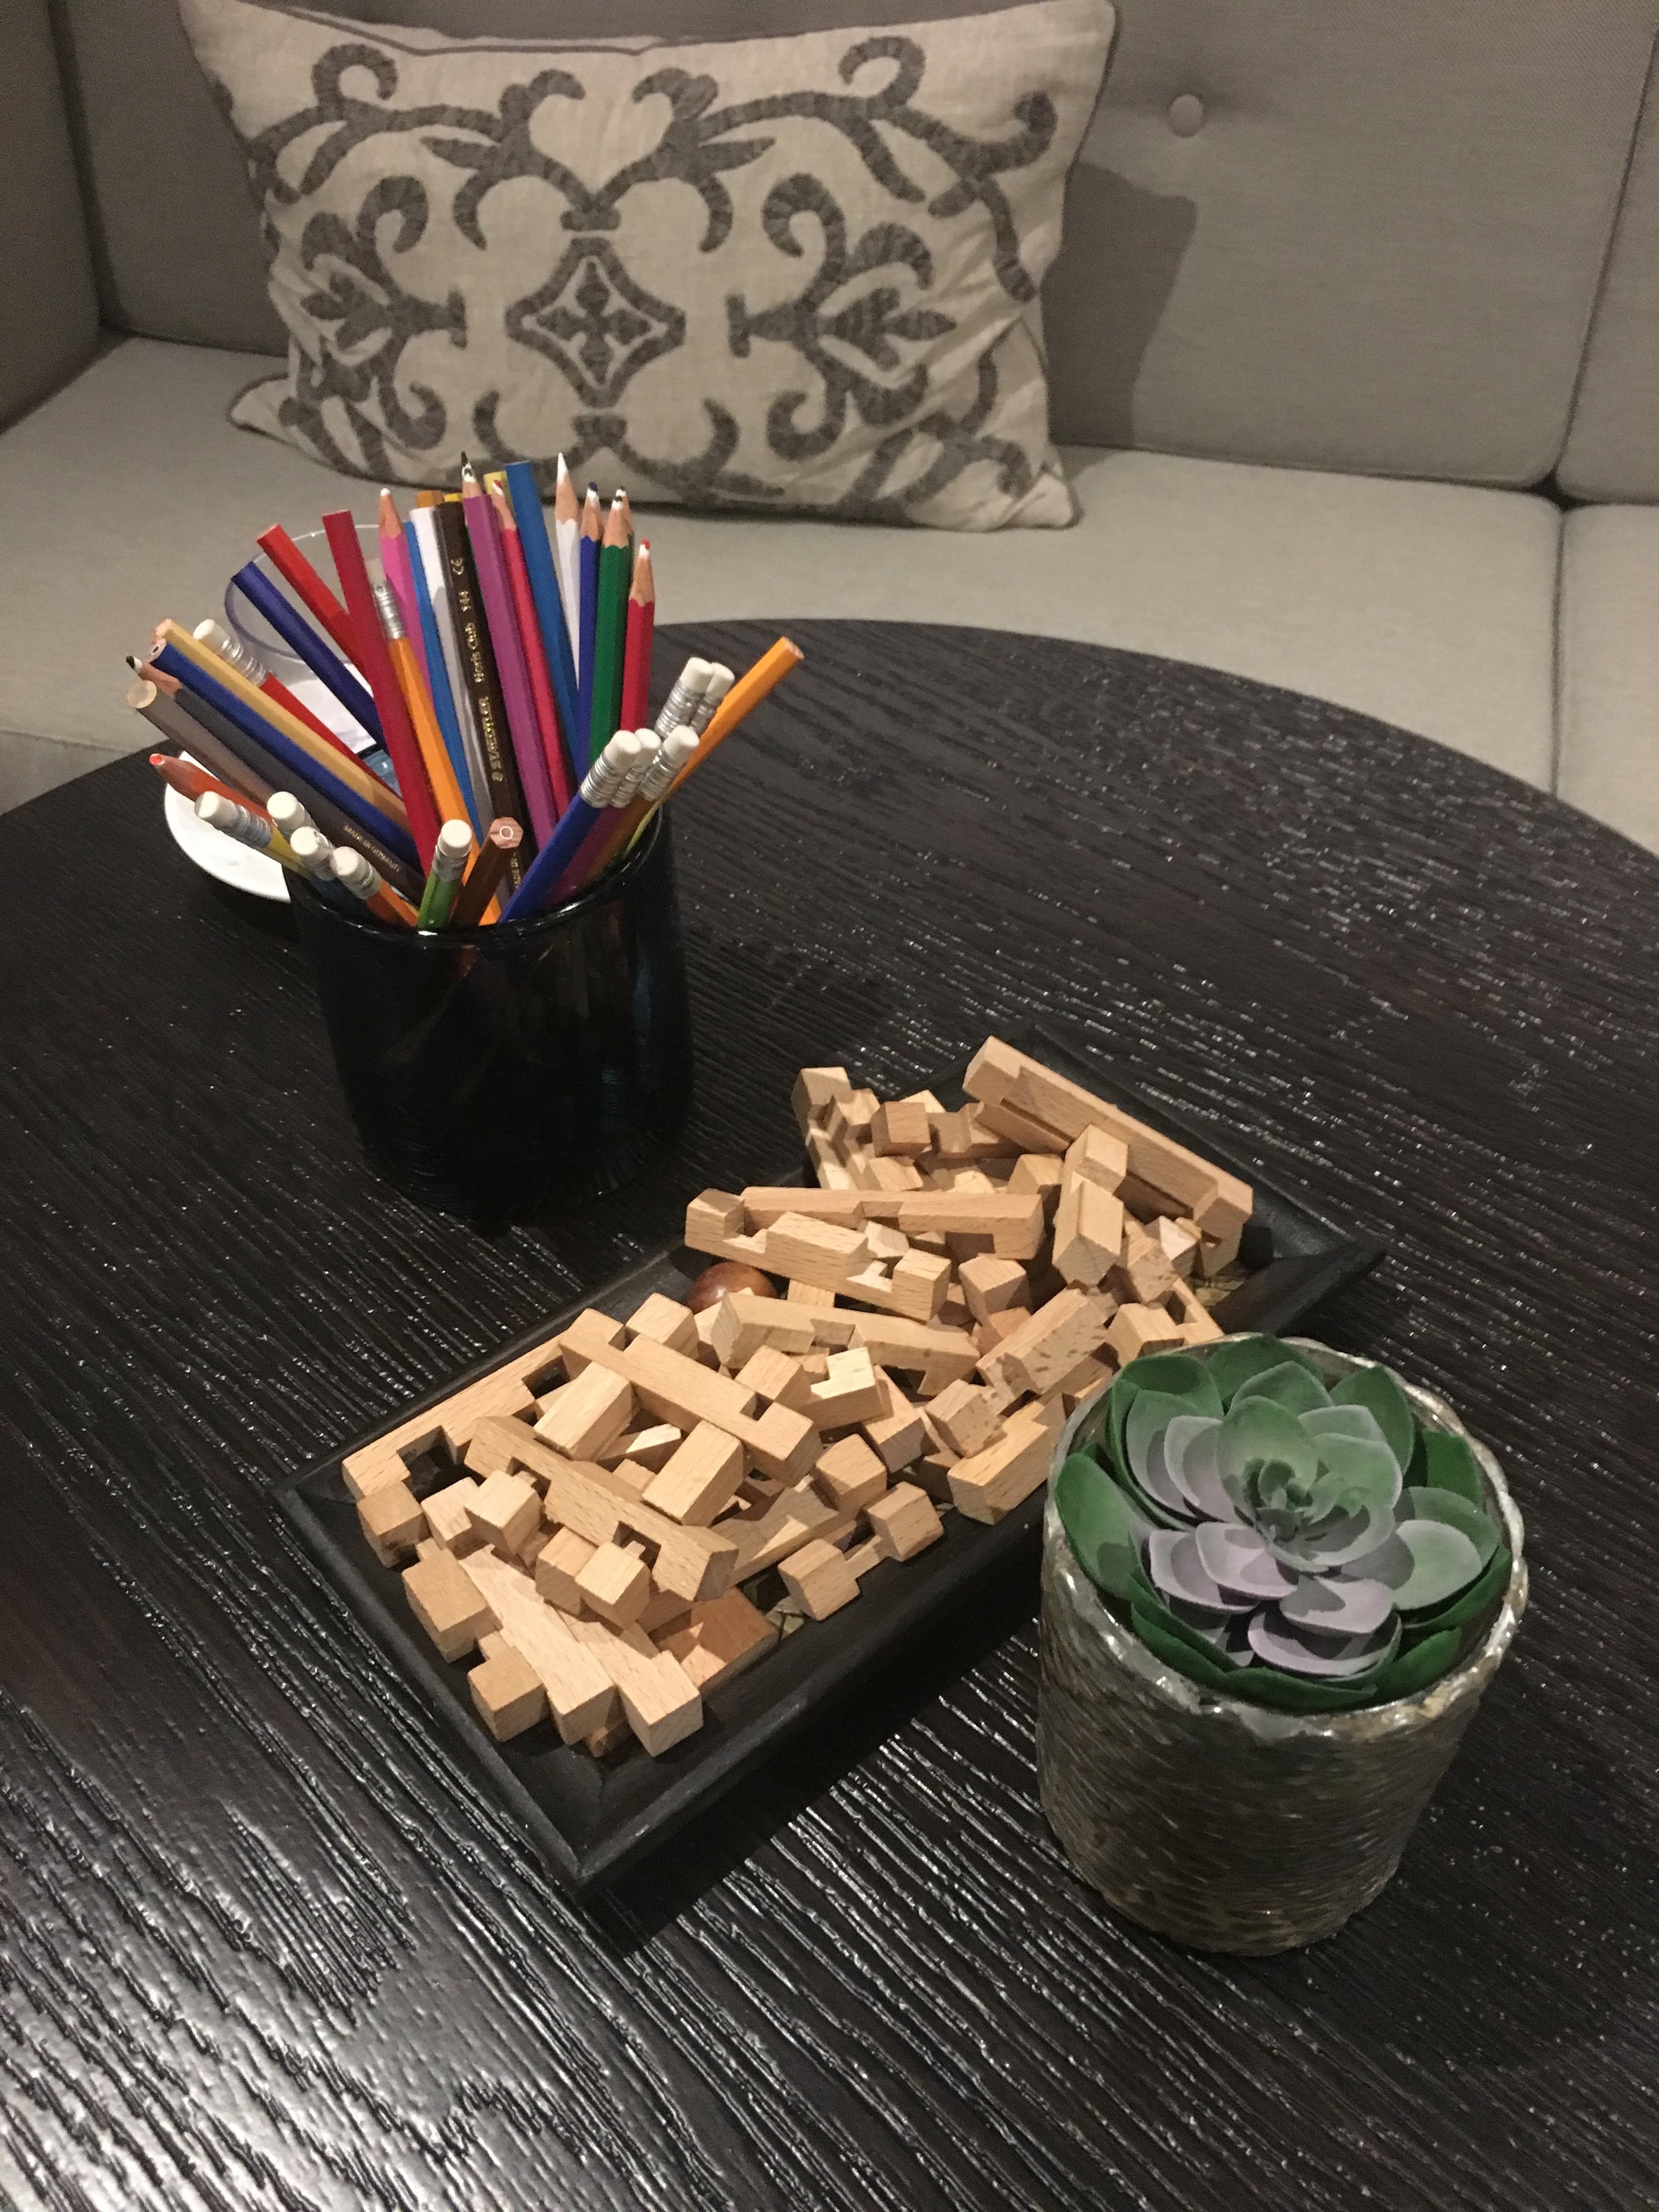  Pencils and puzzles in the 'mind' relaxation area of the spa at Rudding Park  